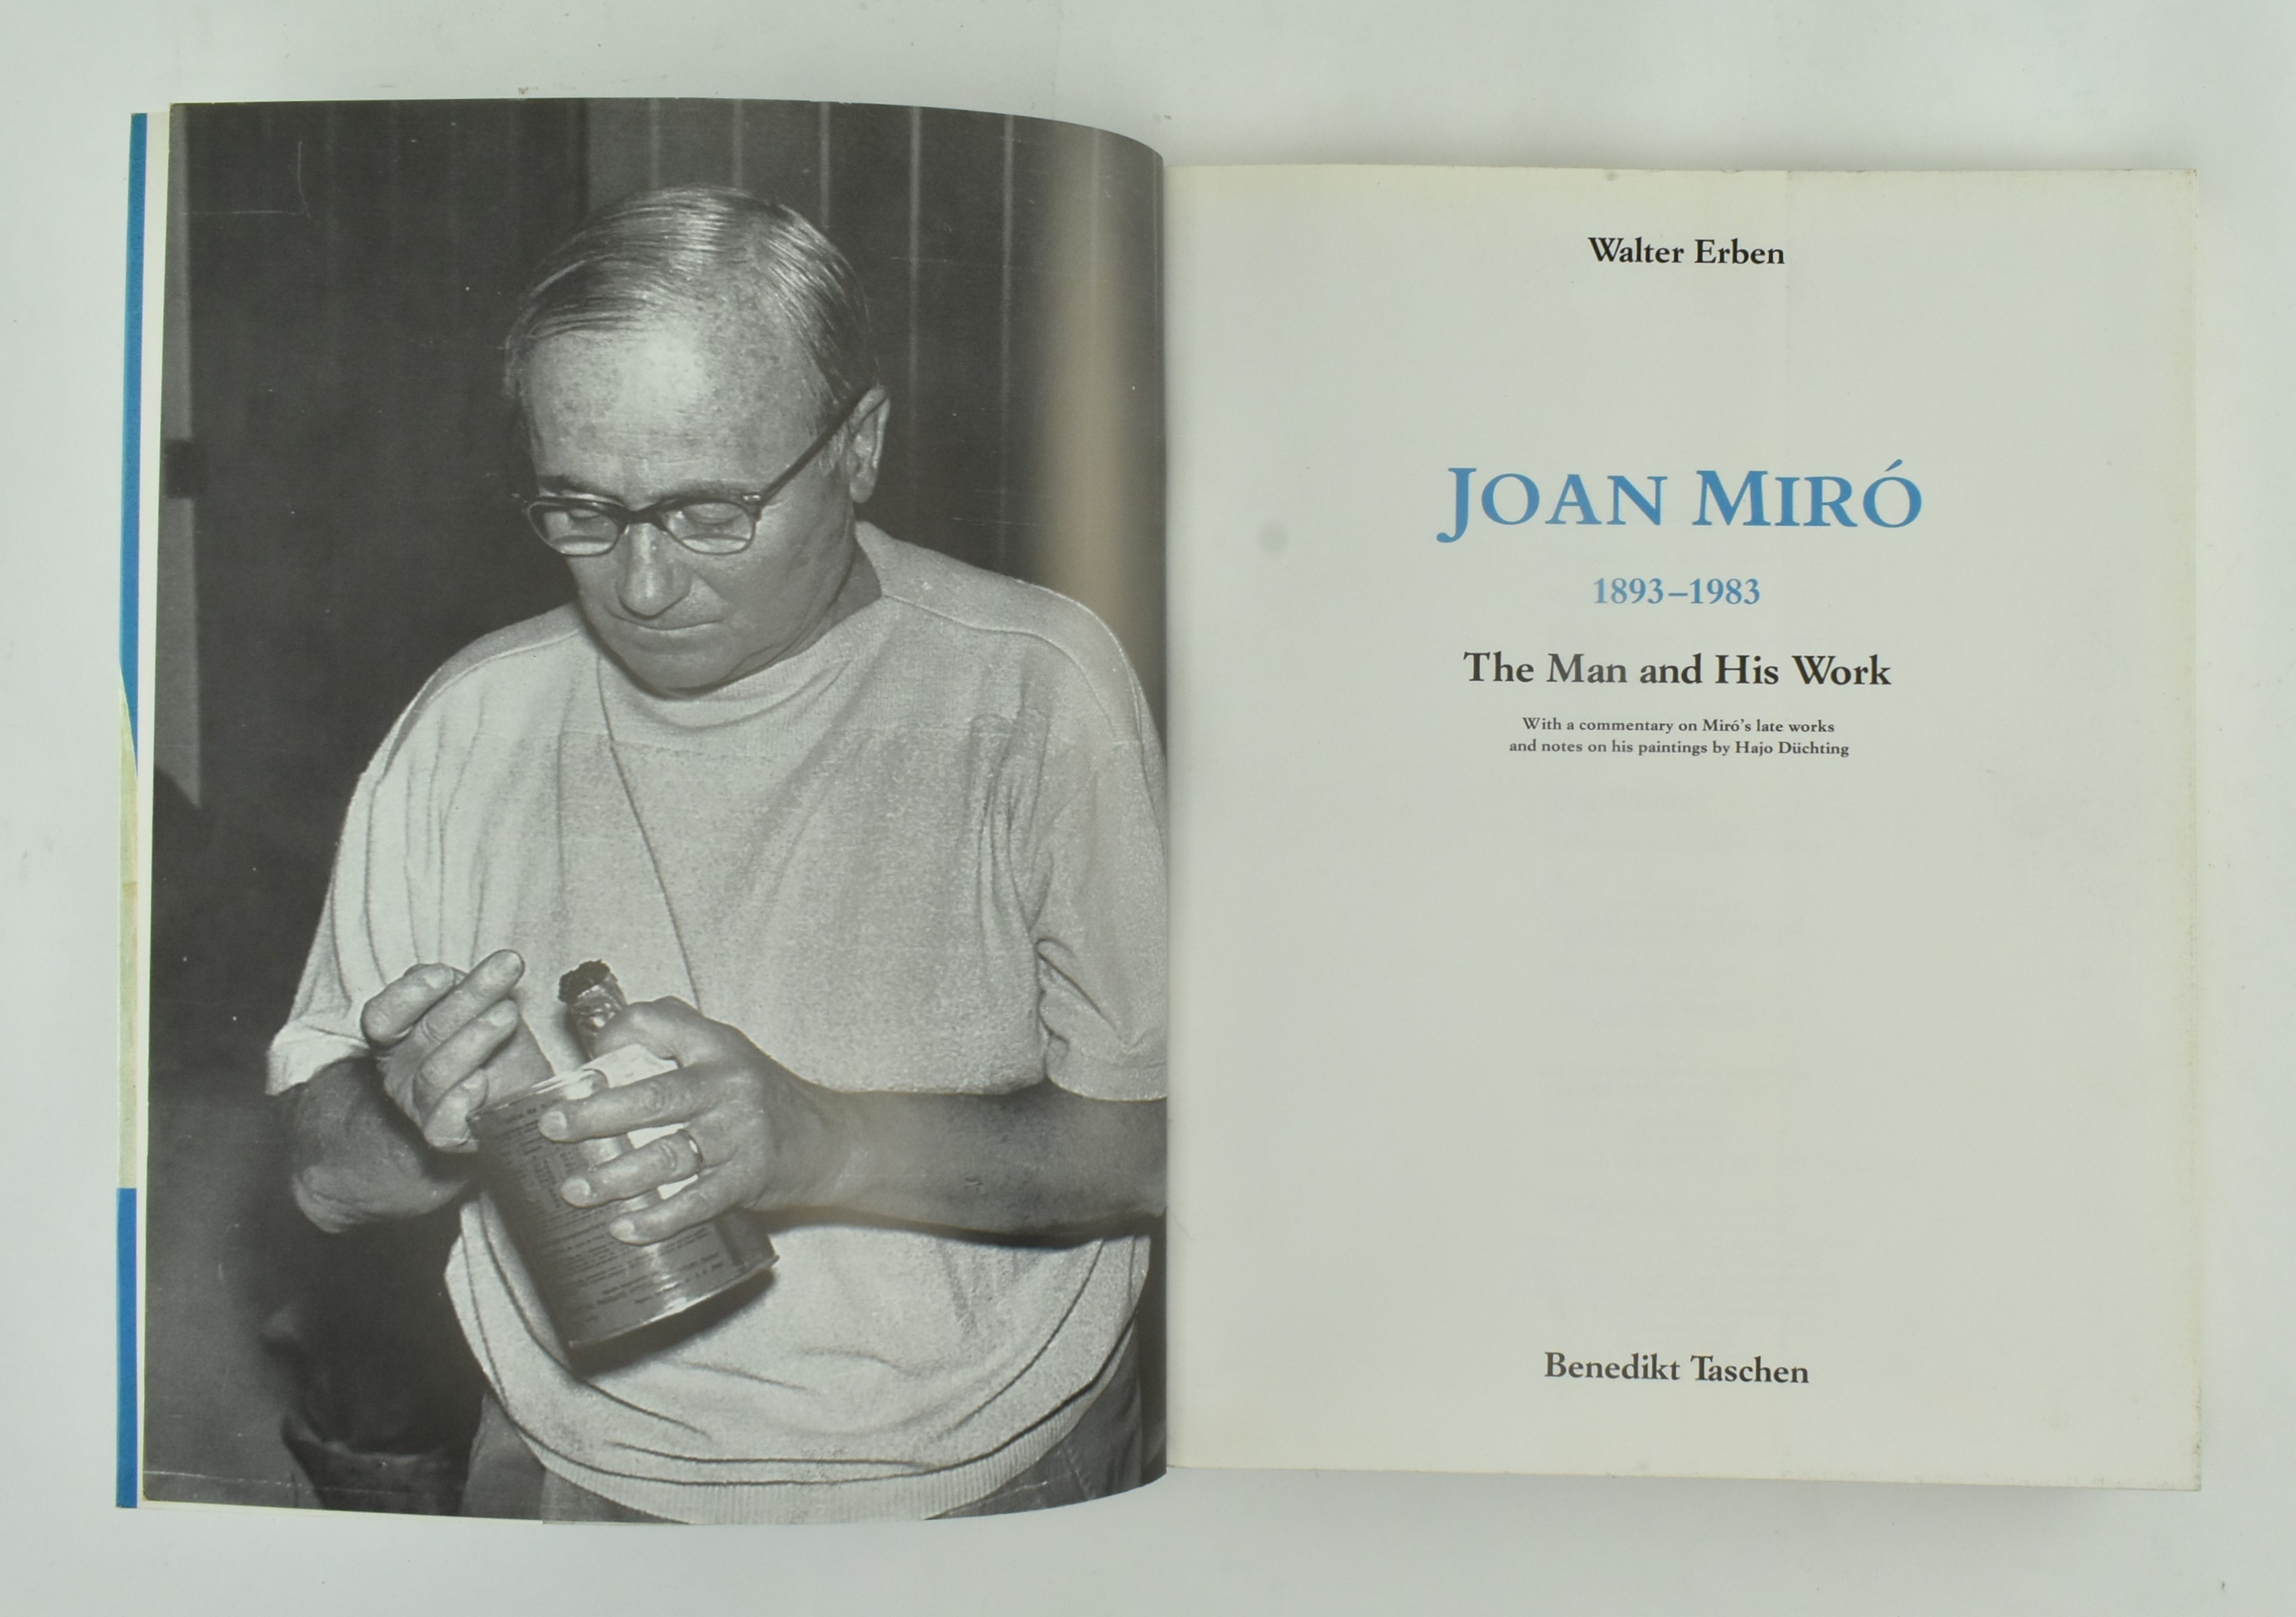 COLLECTION OF ART REFERENCE BOOKS & ARTIST BIOGRAPHIES - Image 10 of 10